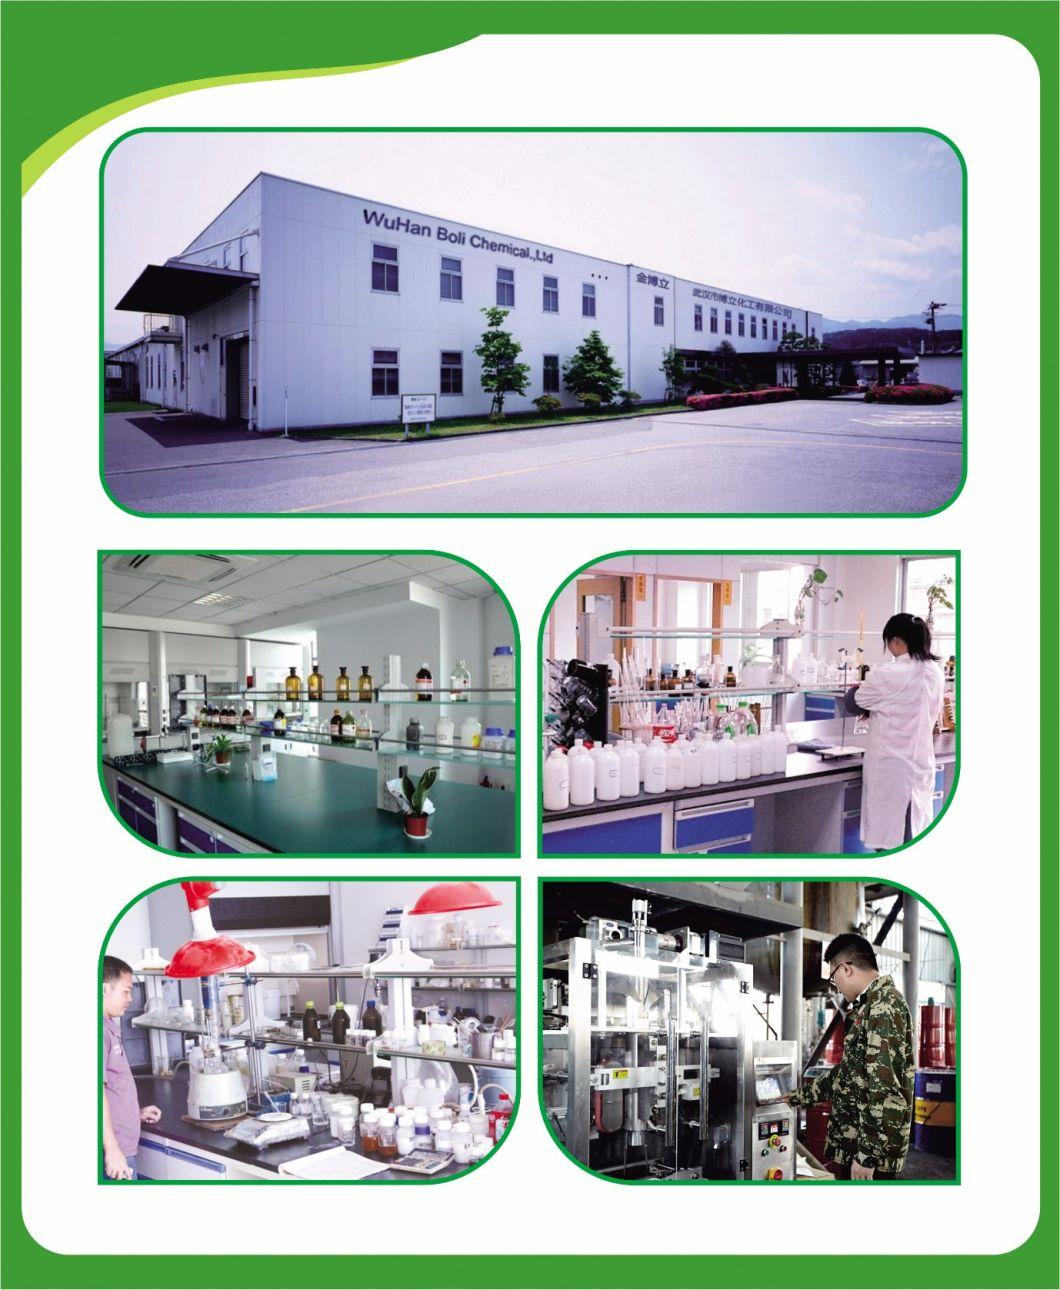 Constructional and Car Manufacturing Footwear Making Furniture Industry Favorite Good Low Cost High Efficiency Chloroprene Glue